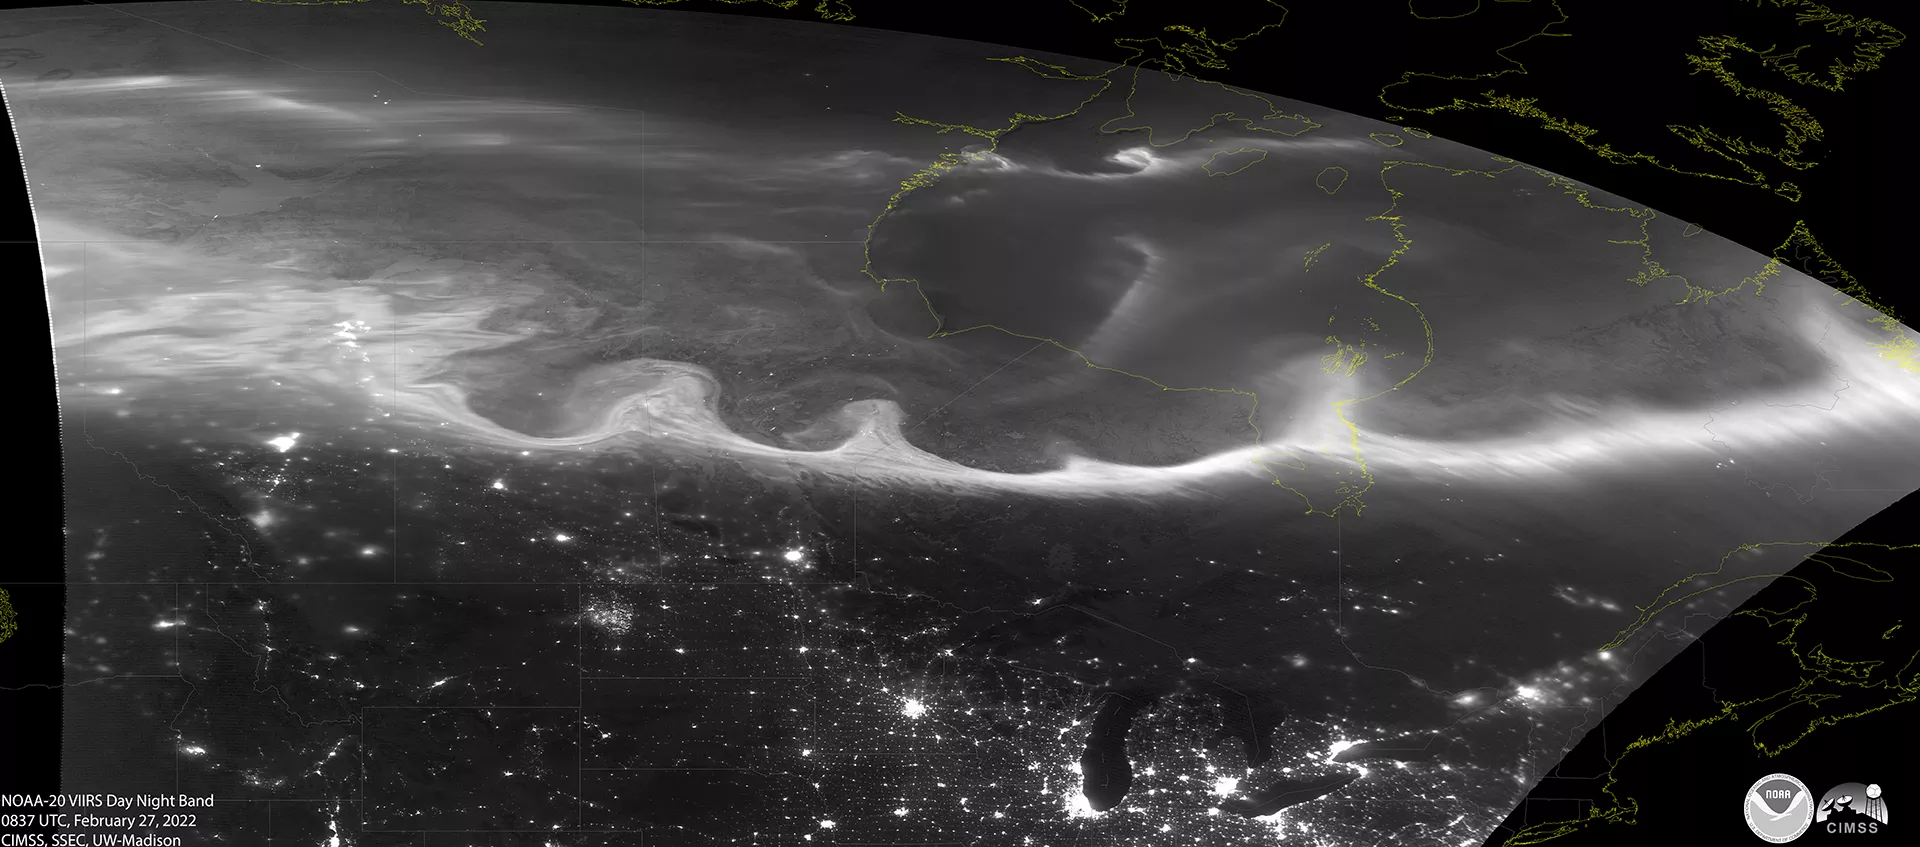 Image of the Day night Band using VIIRs instrument of the northern hemisphere